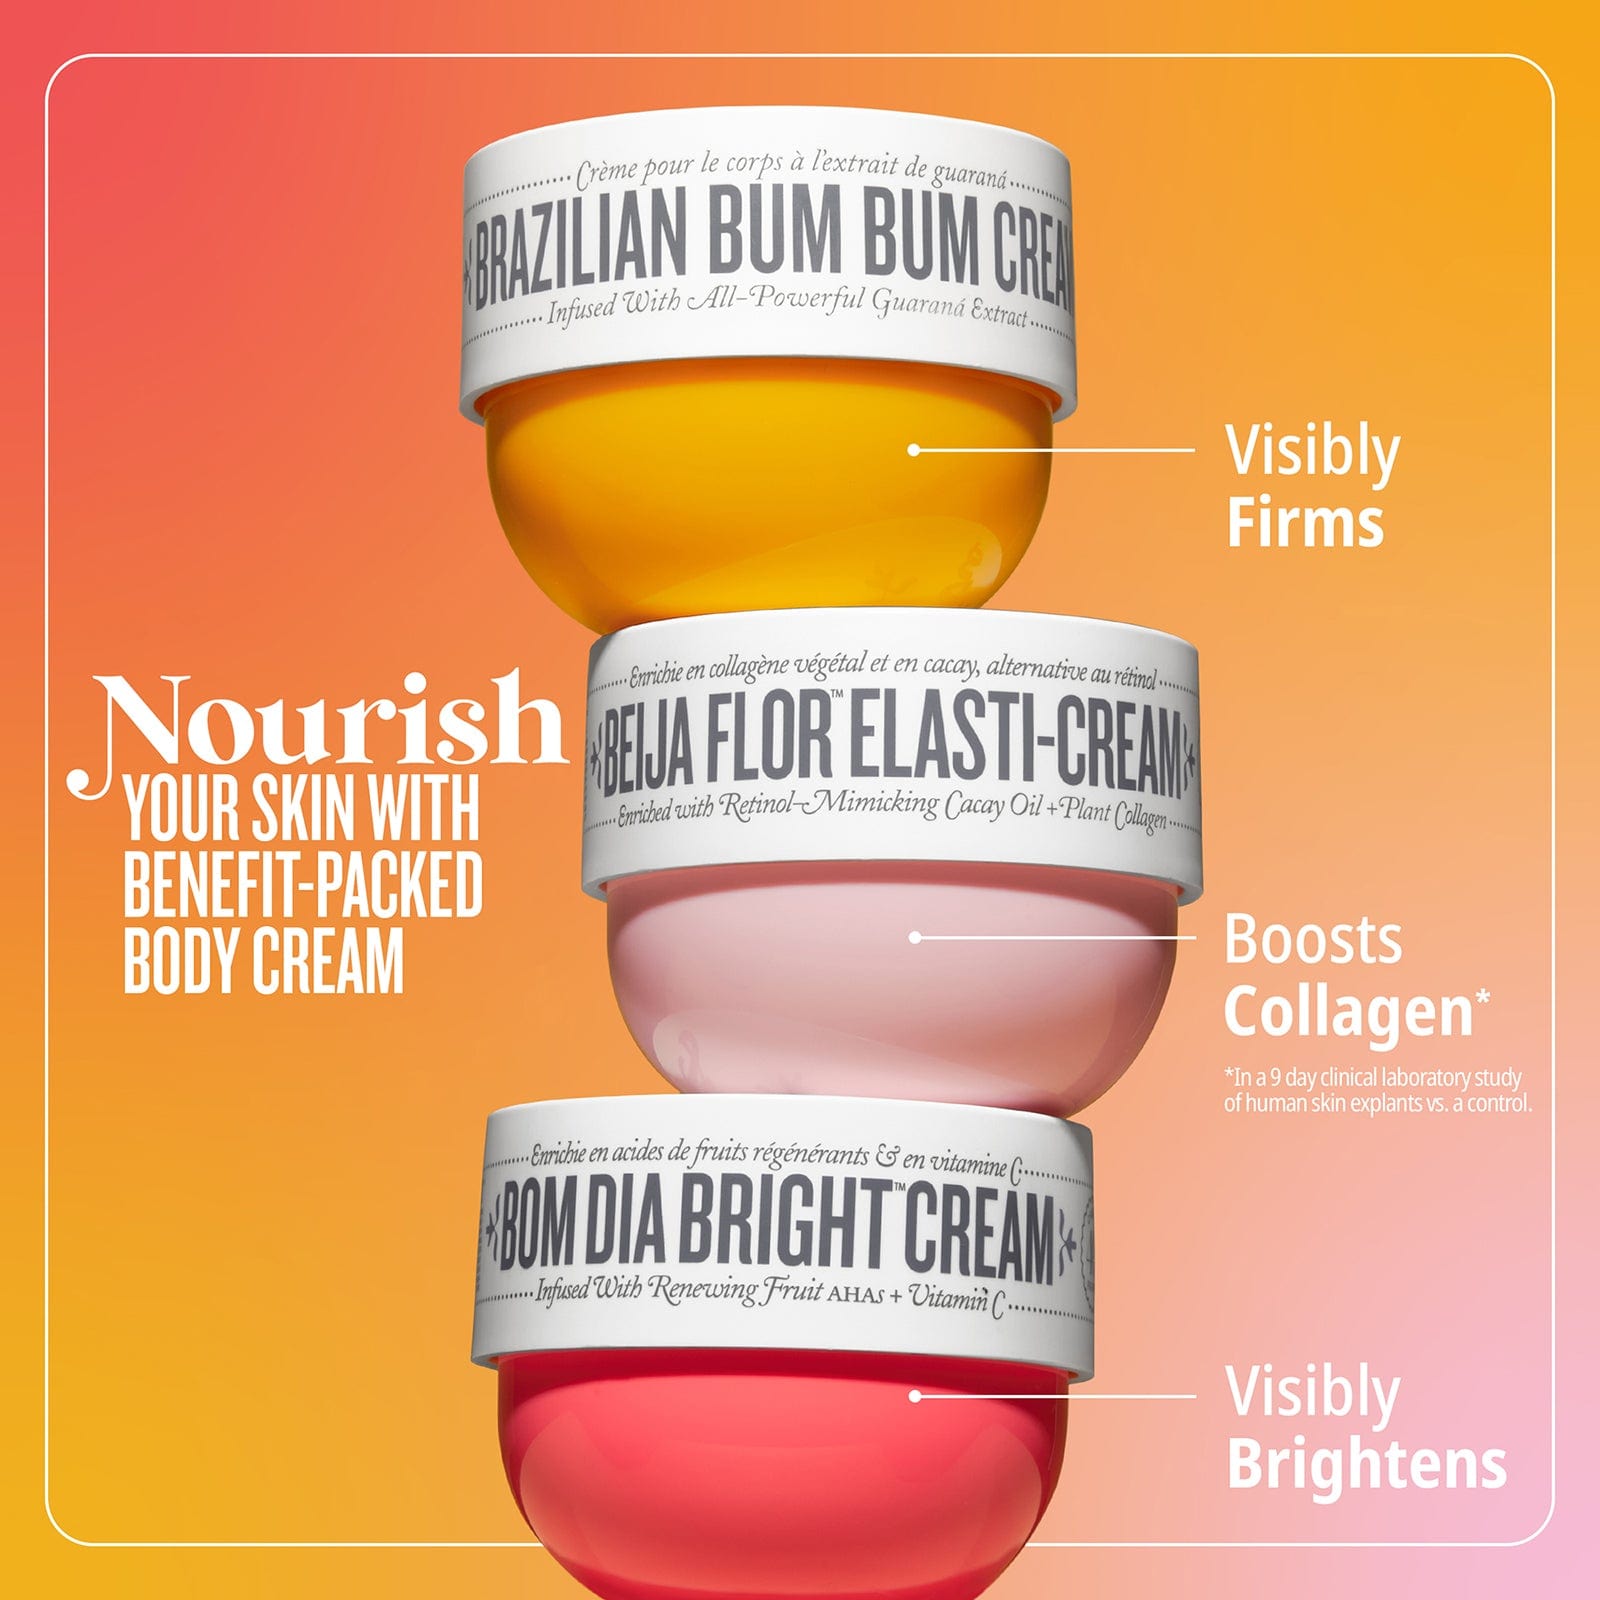 Nourish Your Skin with benefit-packed body cream | Brazilian Bum Bum Cream - visibly firms |  Beija flor elasti-cream - boosts collagen,  in a 9 day clinical laboratory study of human skin explants vs. a control | Bom dia bright cream - visibly brightens | Sol de Janeiro